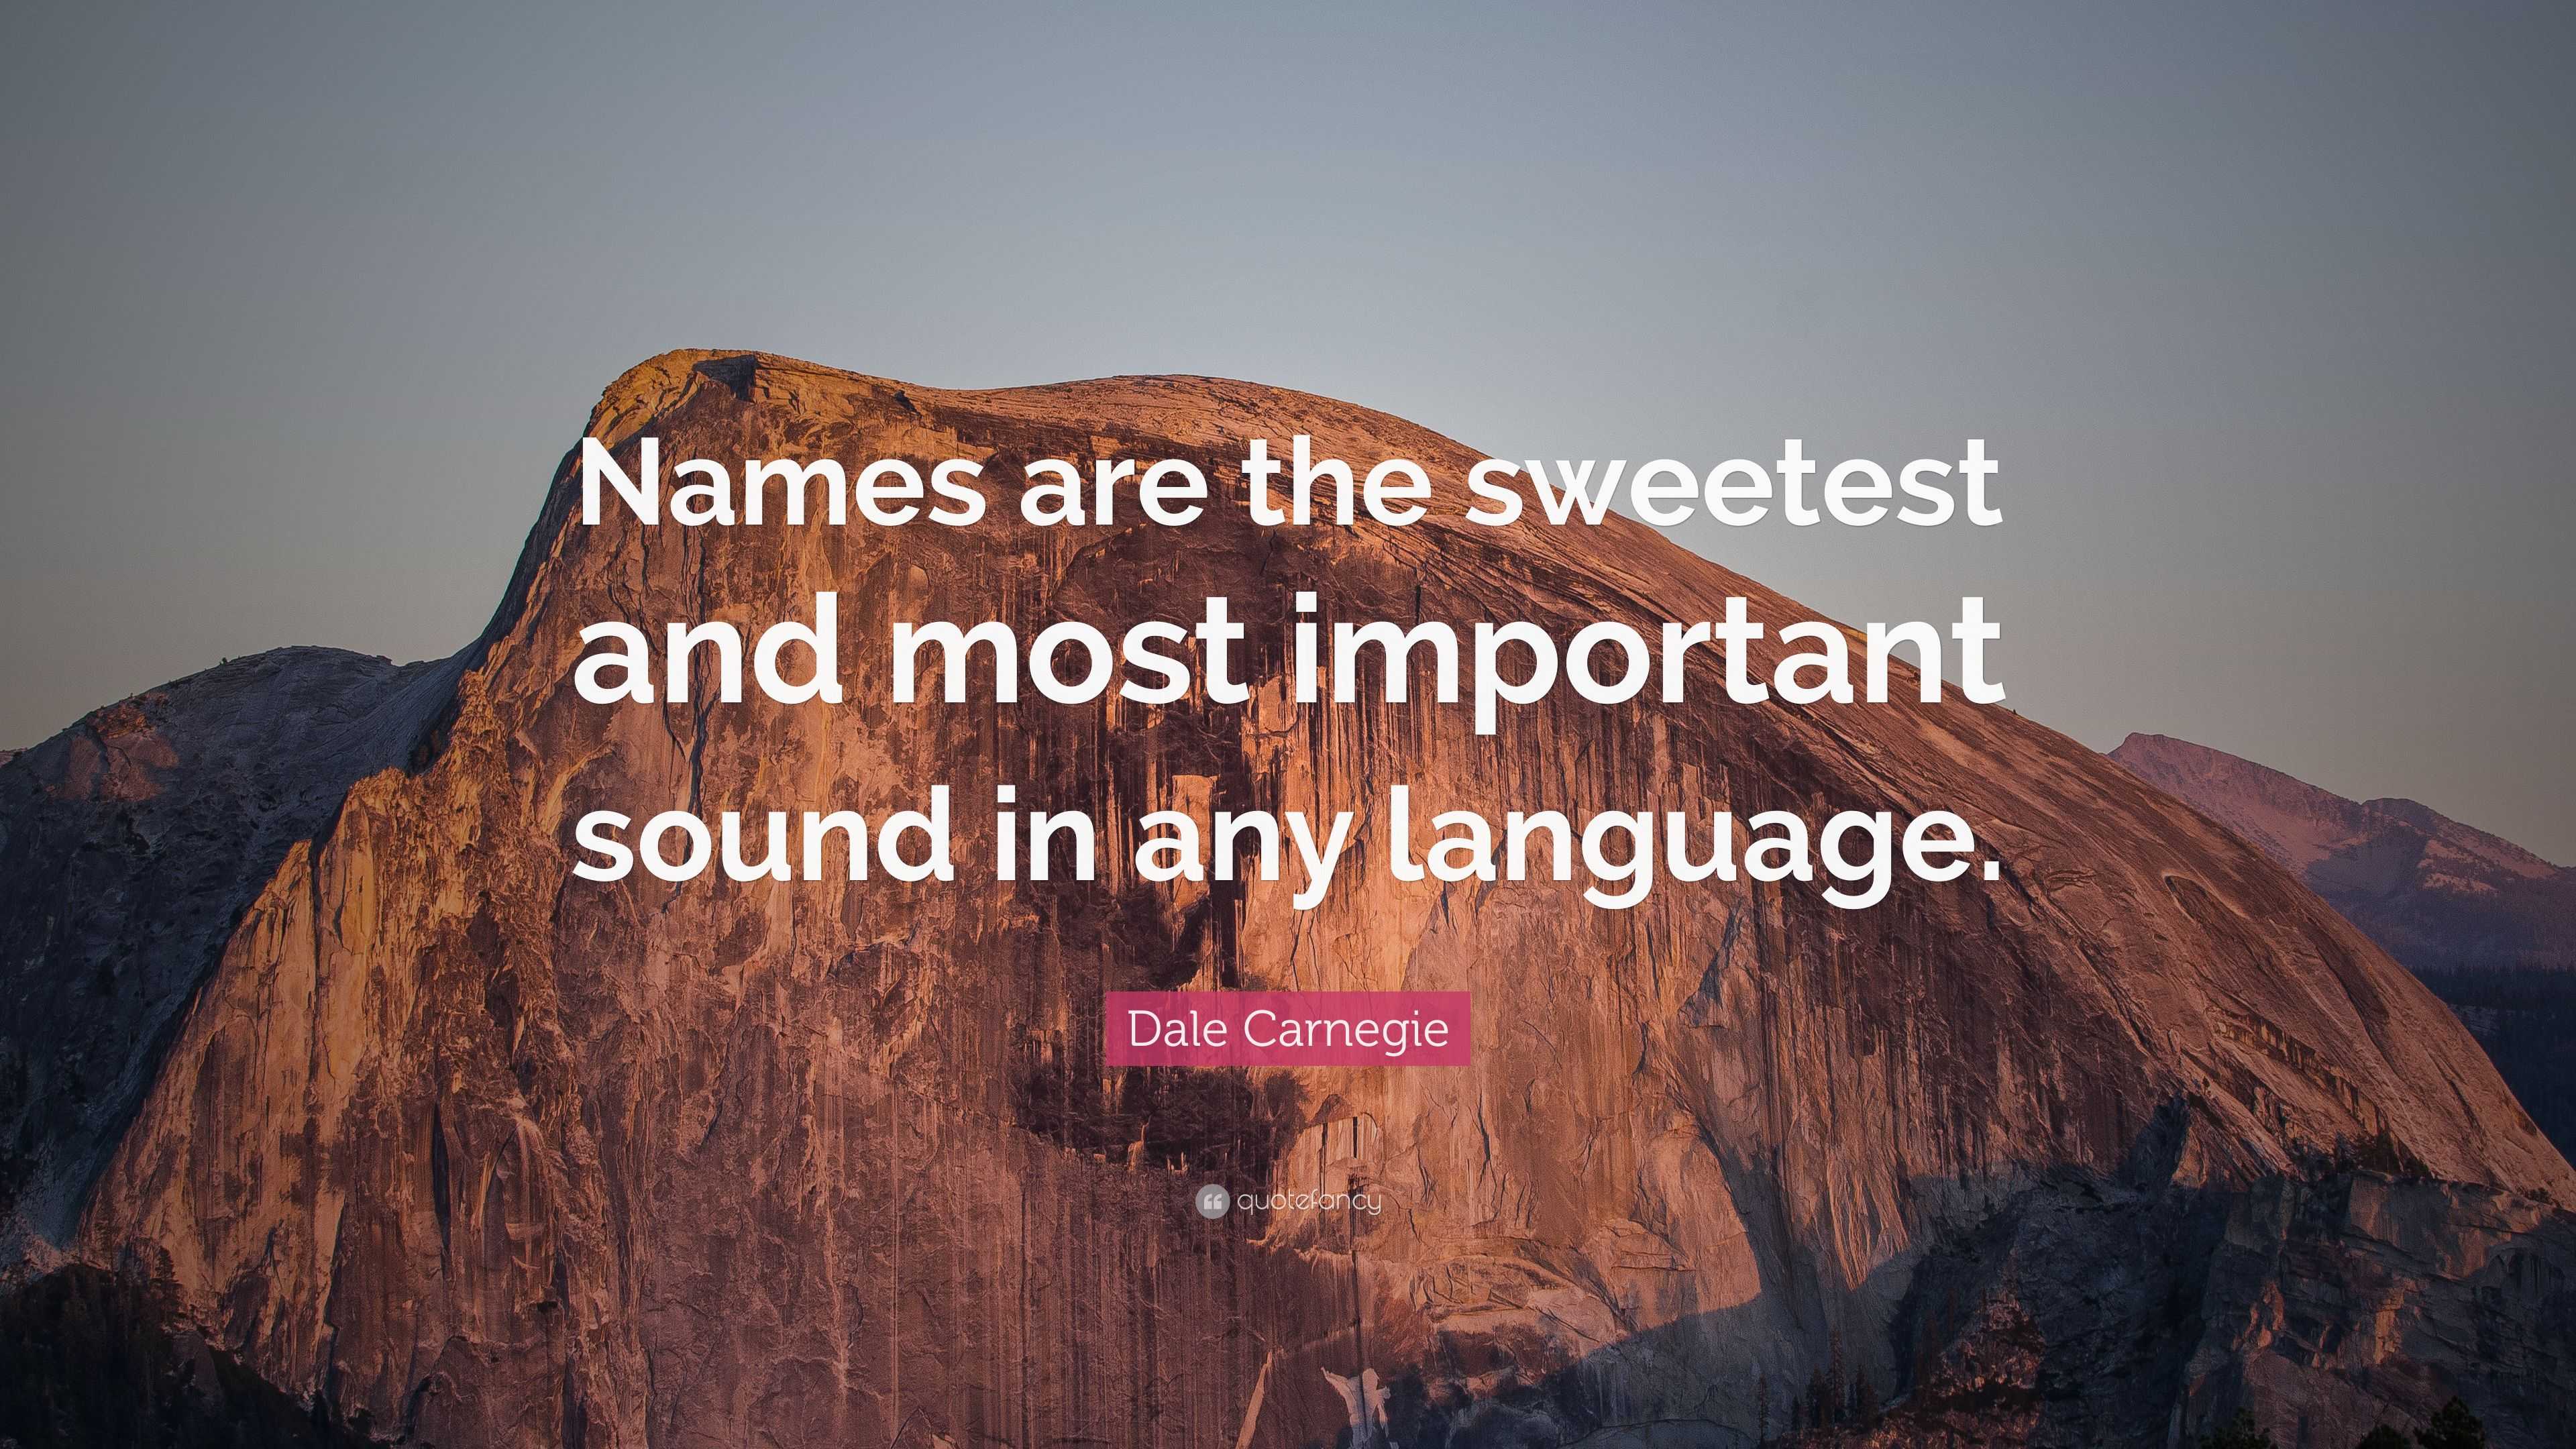 Dale Carnegie Quote: “Names are the sweetest and most important sound